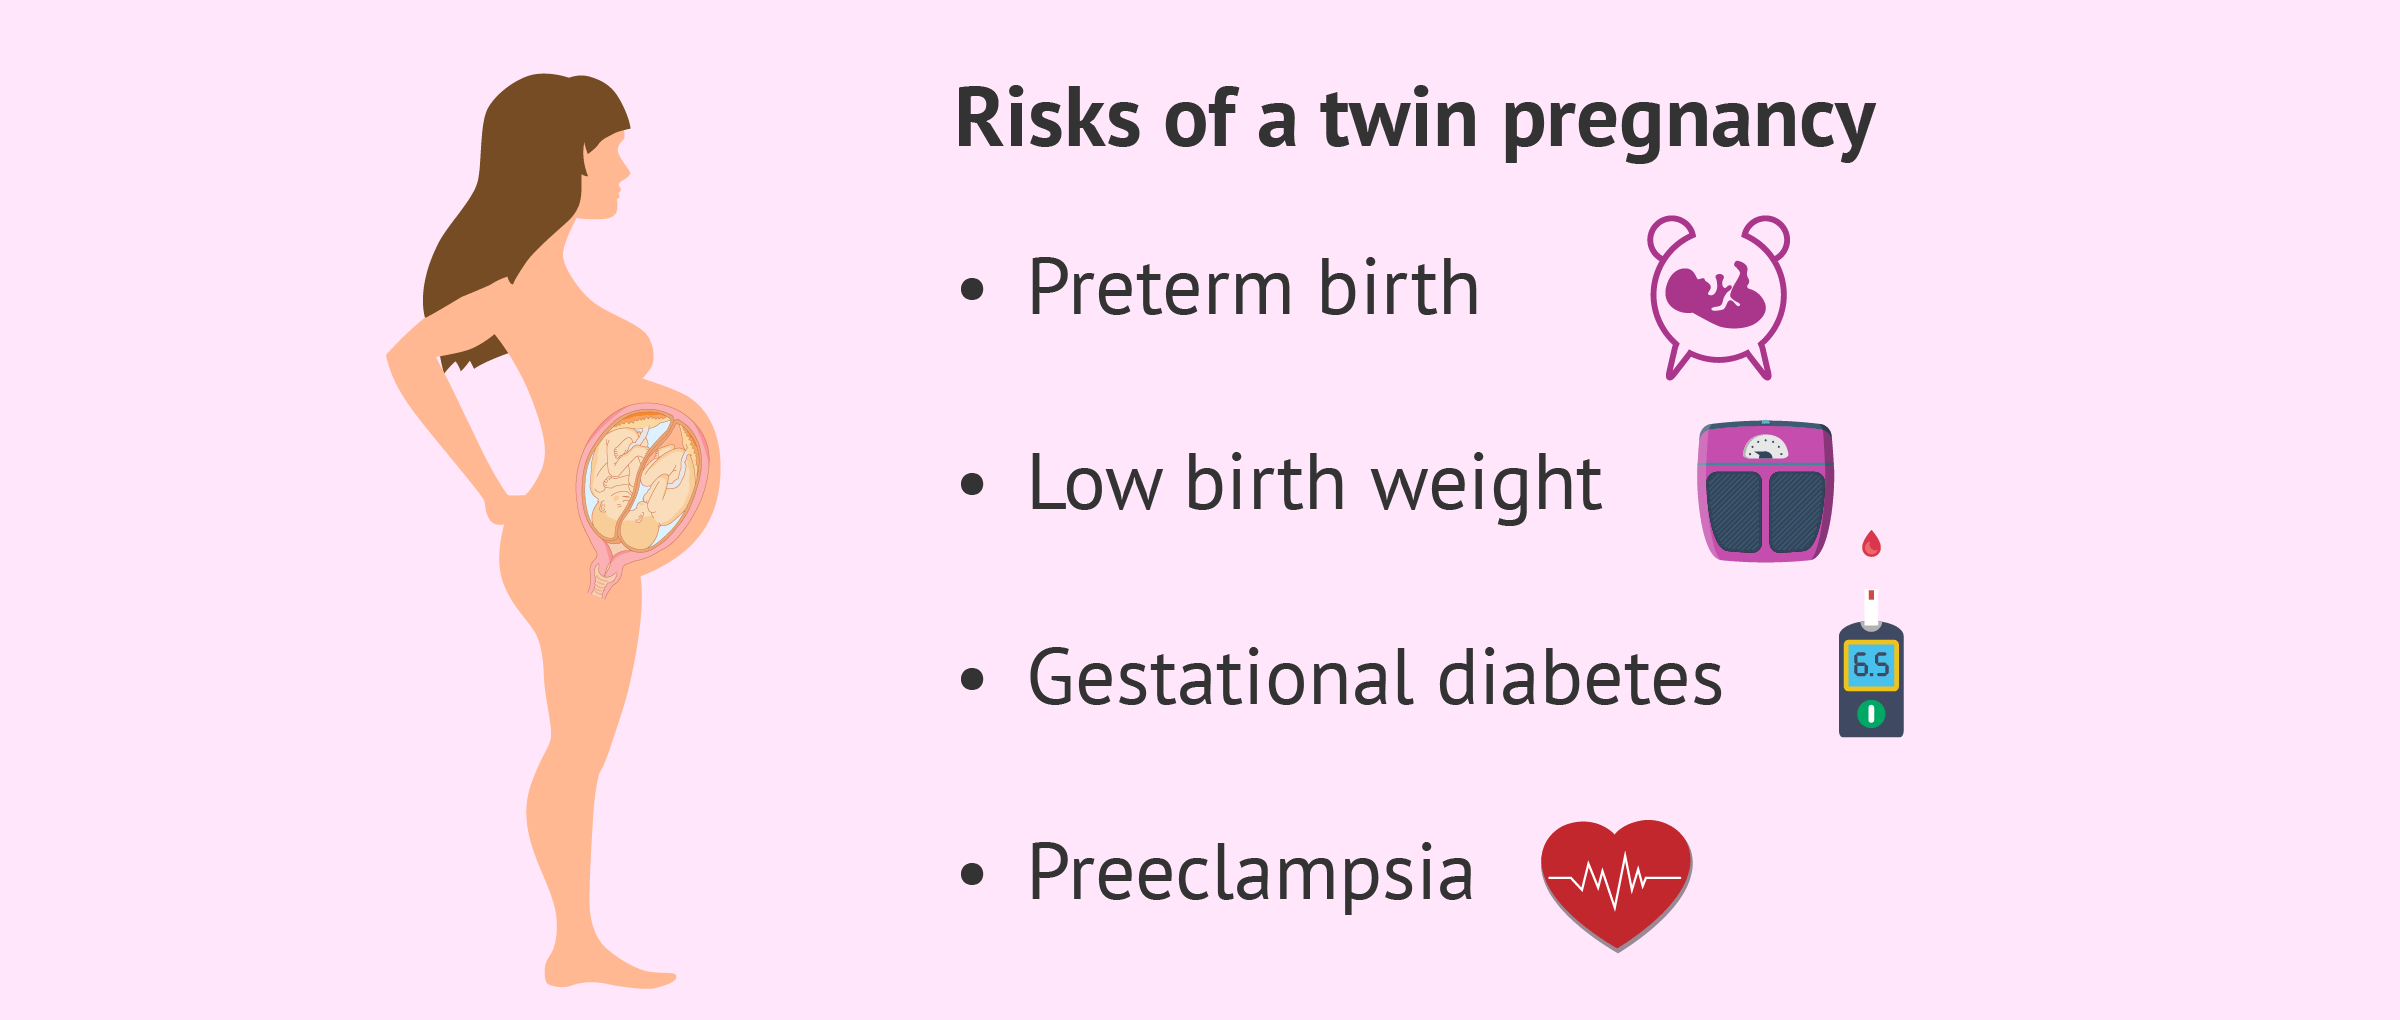 Risks associated with twin pregnancies